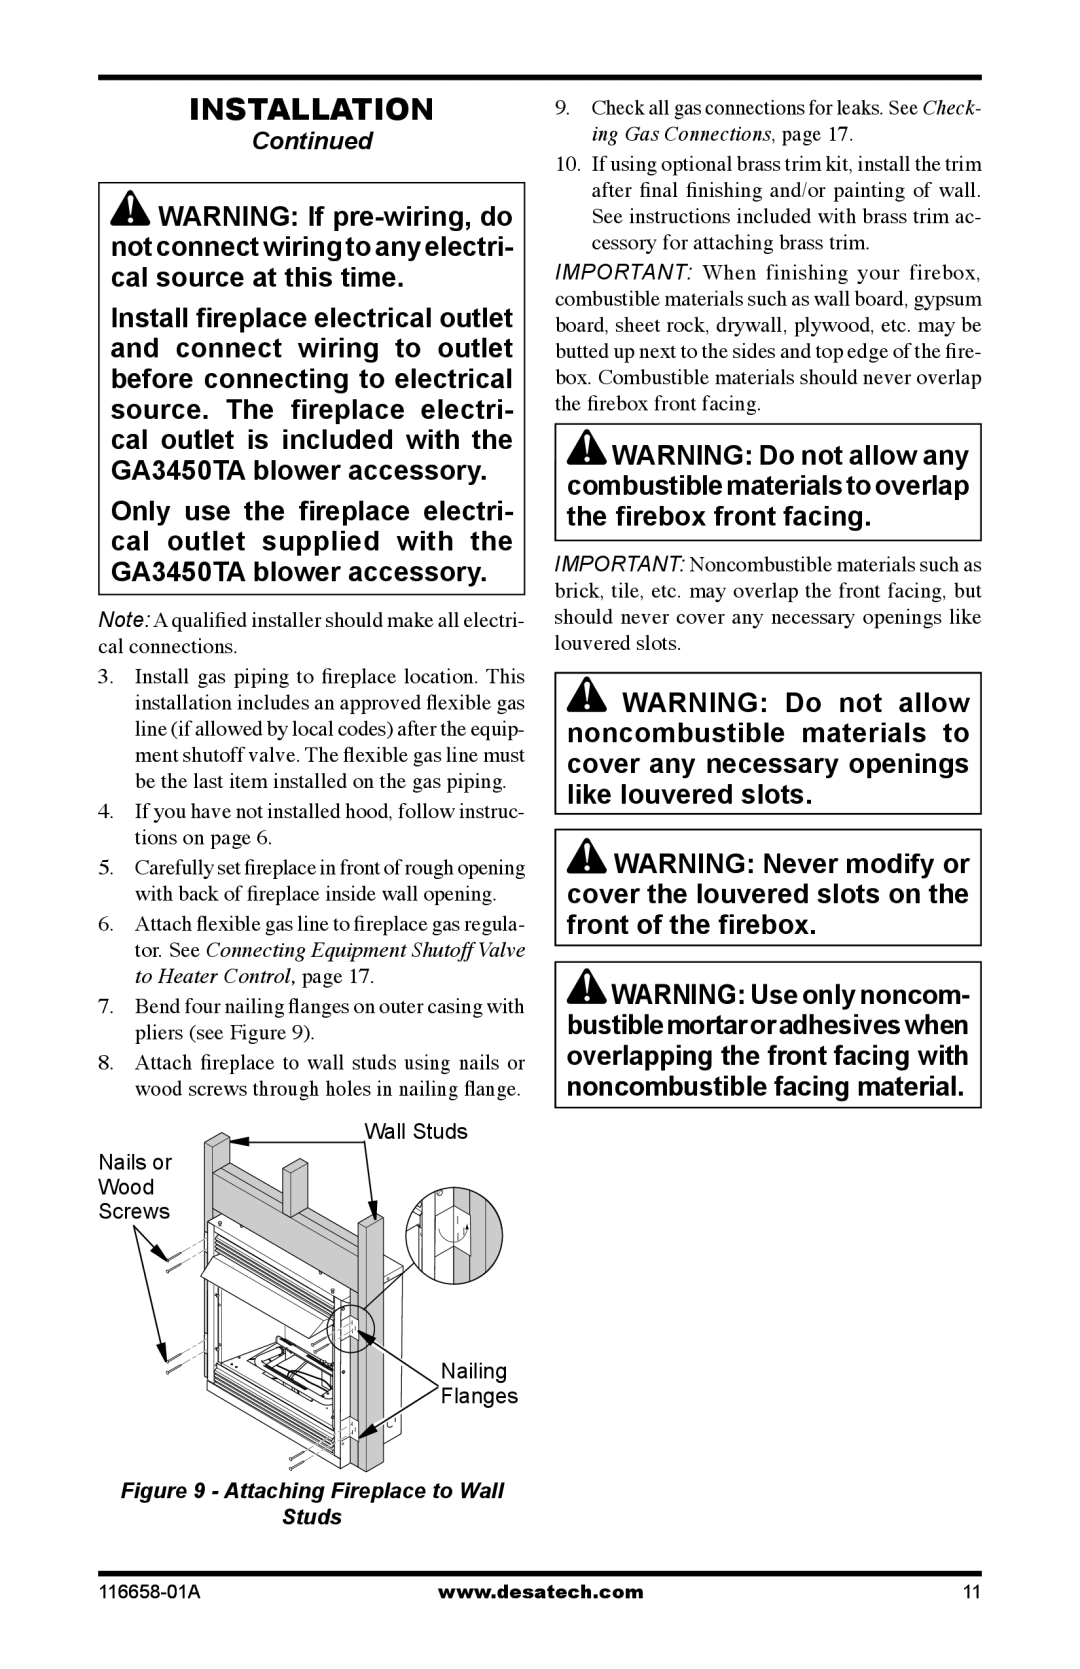 Desa CDCFPRA Note A qualiﬁed installer should make all electri- cal connections, Attaching Fireplace to Wall Studs 